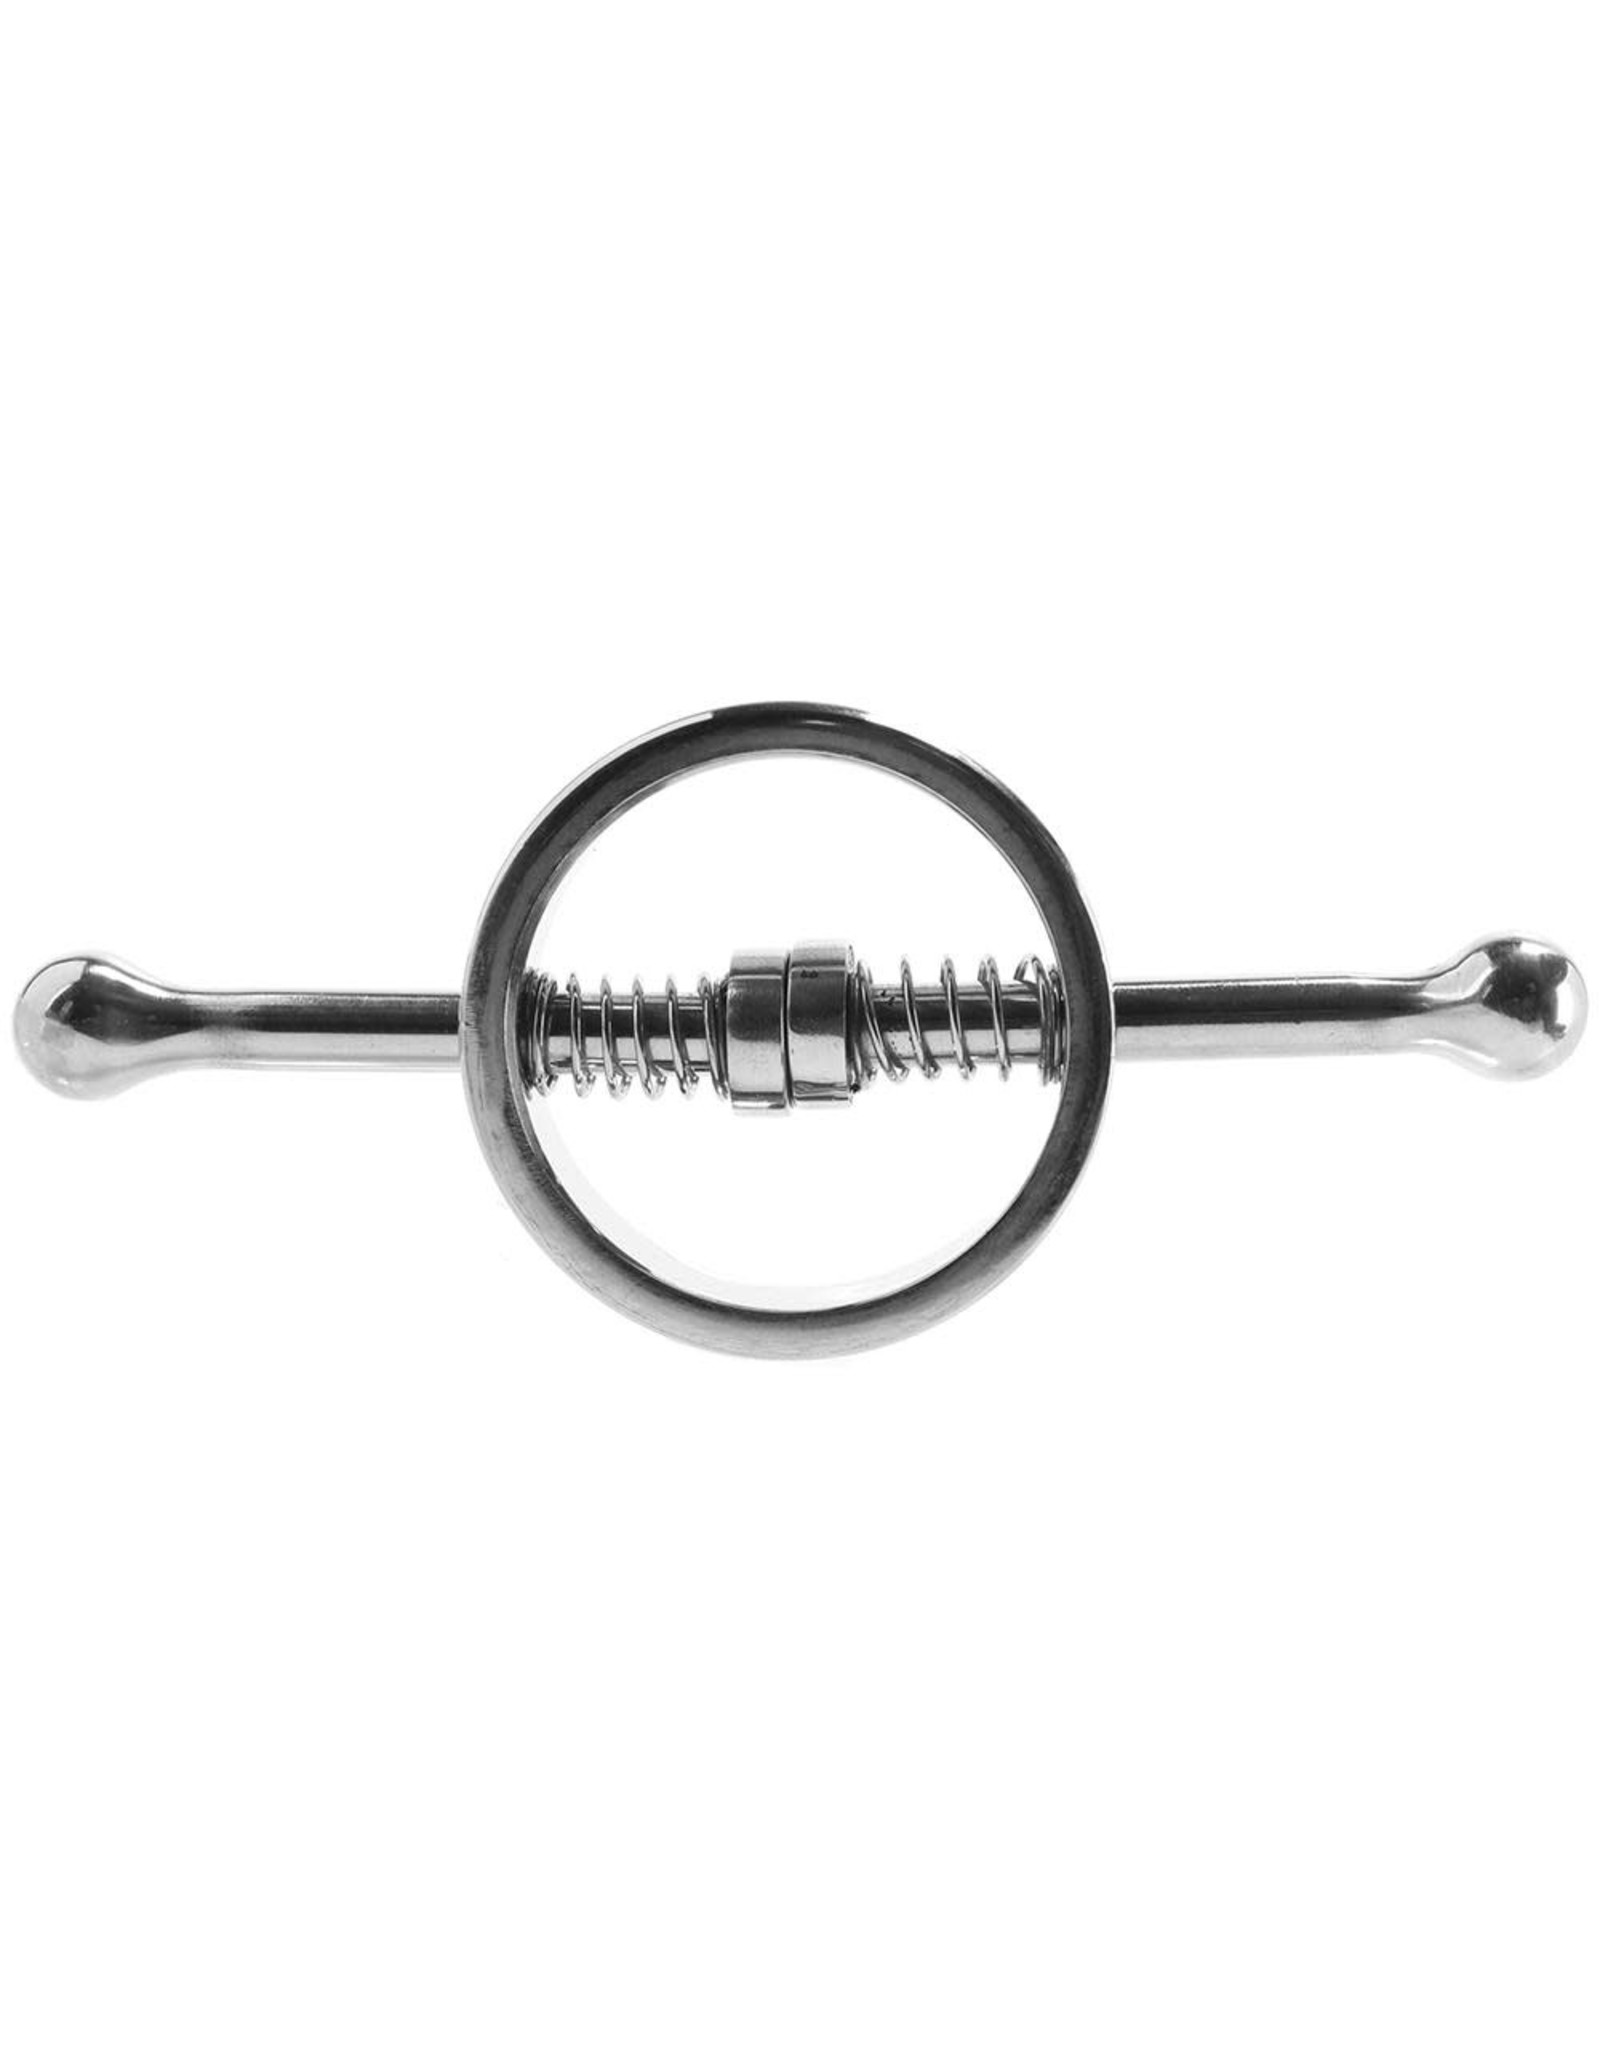 Rouge- Spring Loaded Nipple Clamps- Stainless Steel